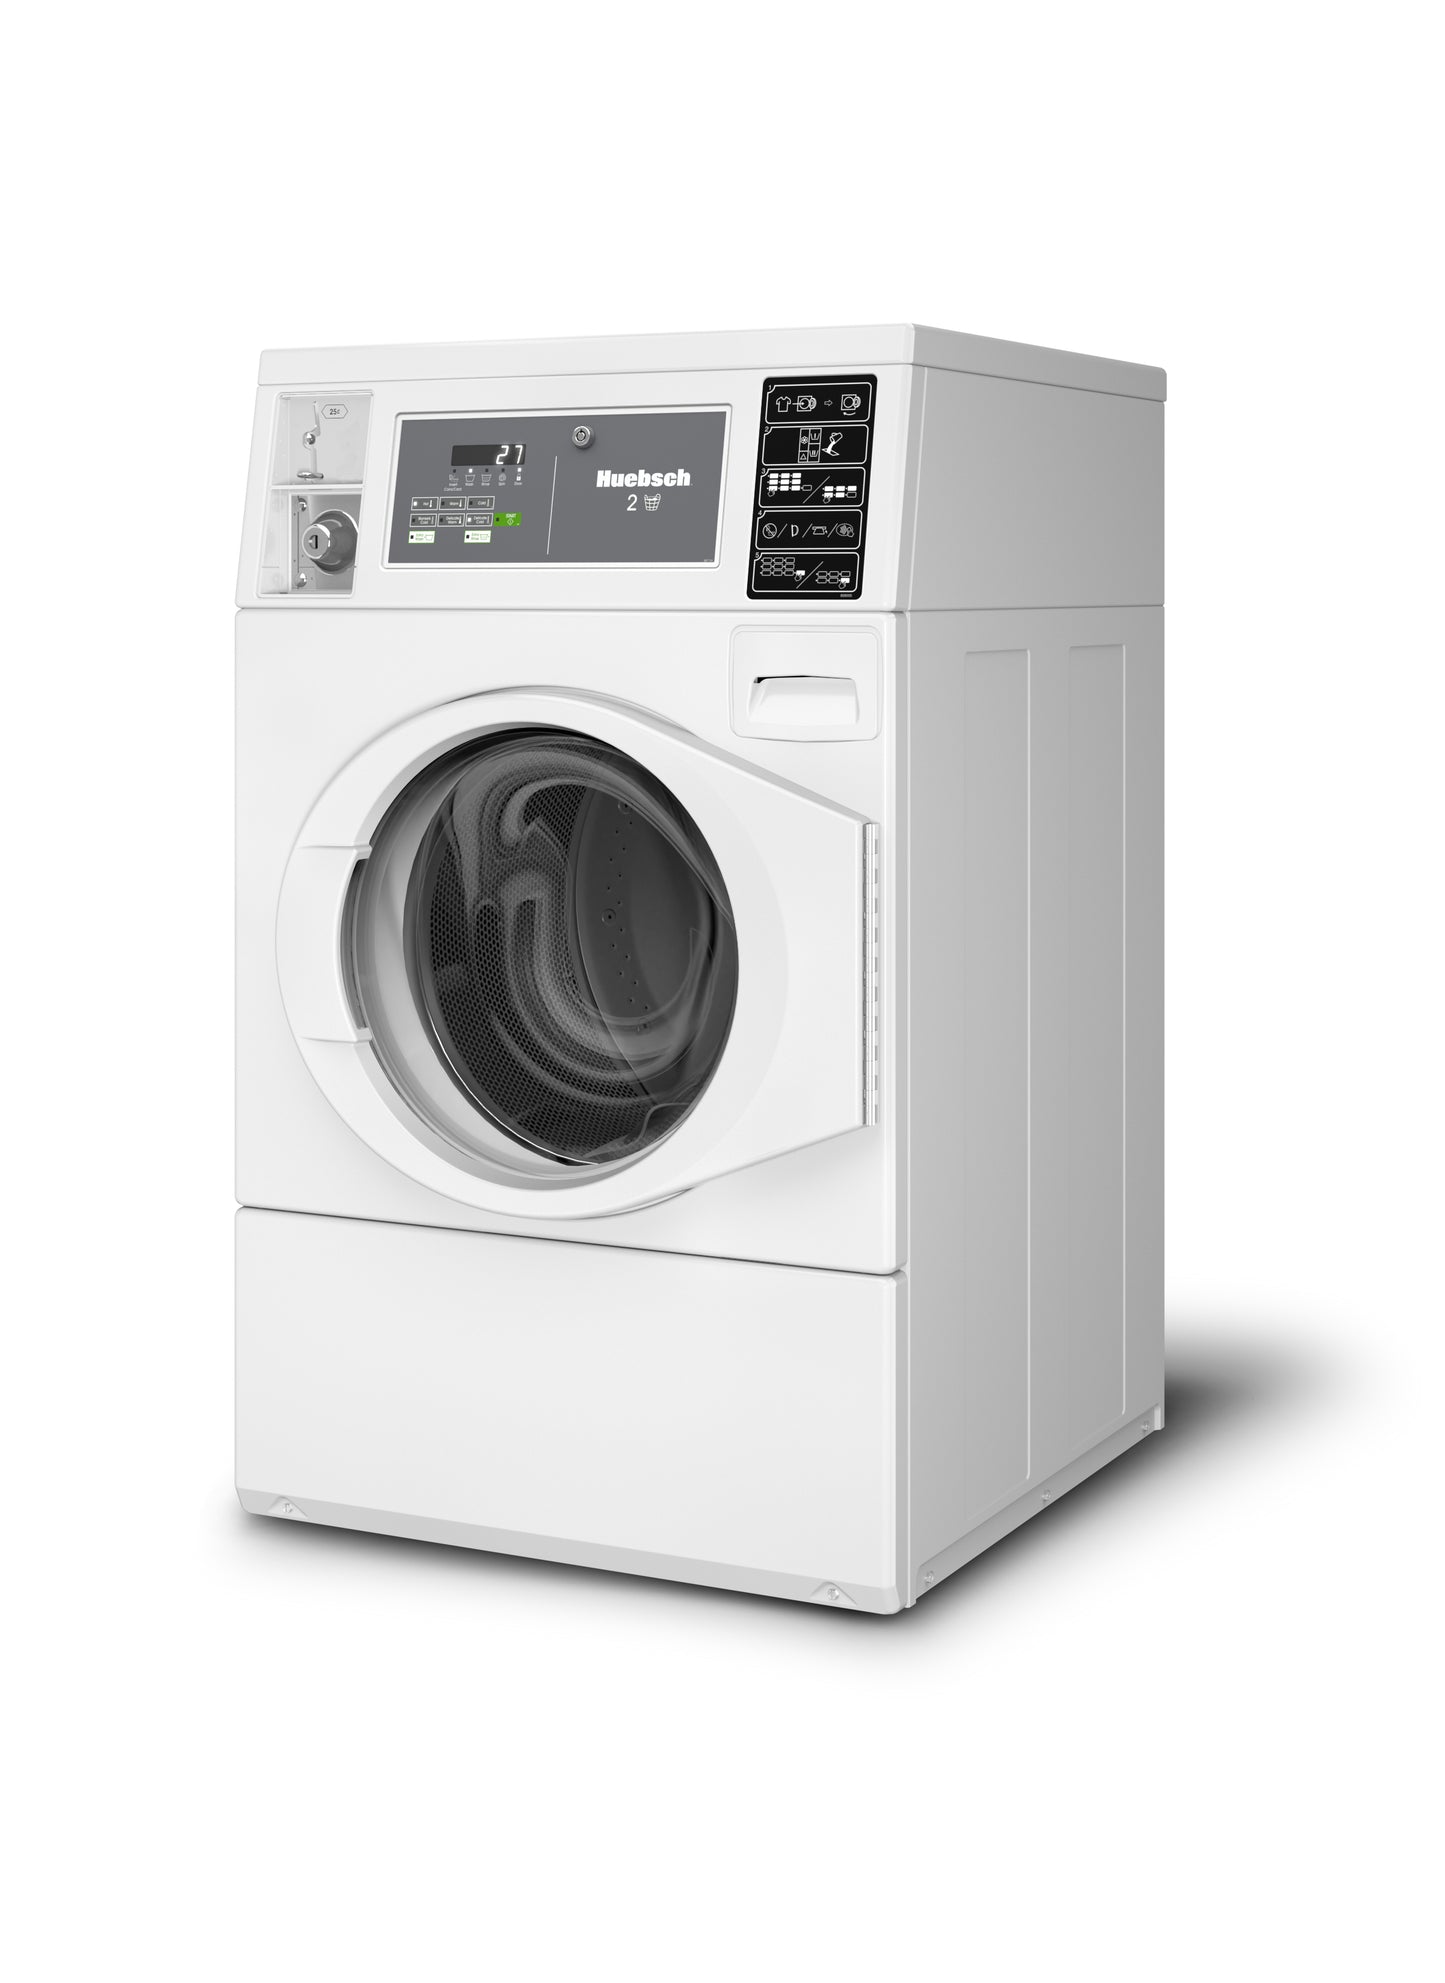 COMMERCIAL FRONT LOAD WASHER